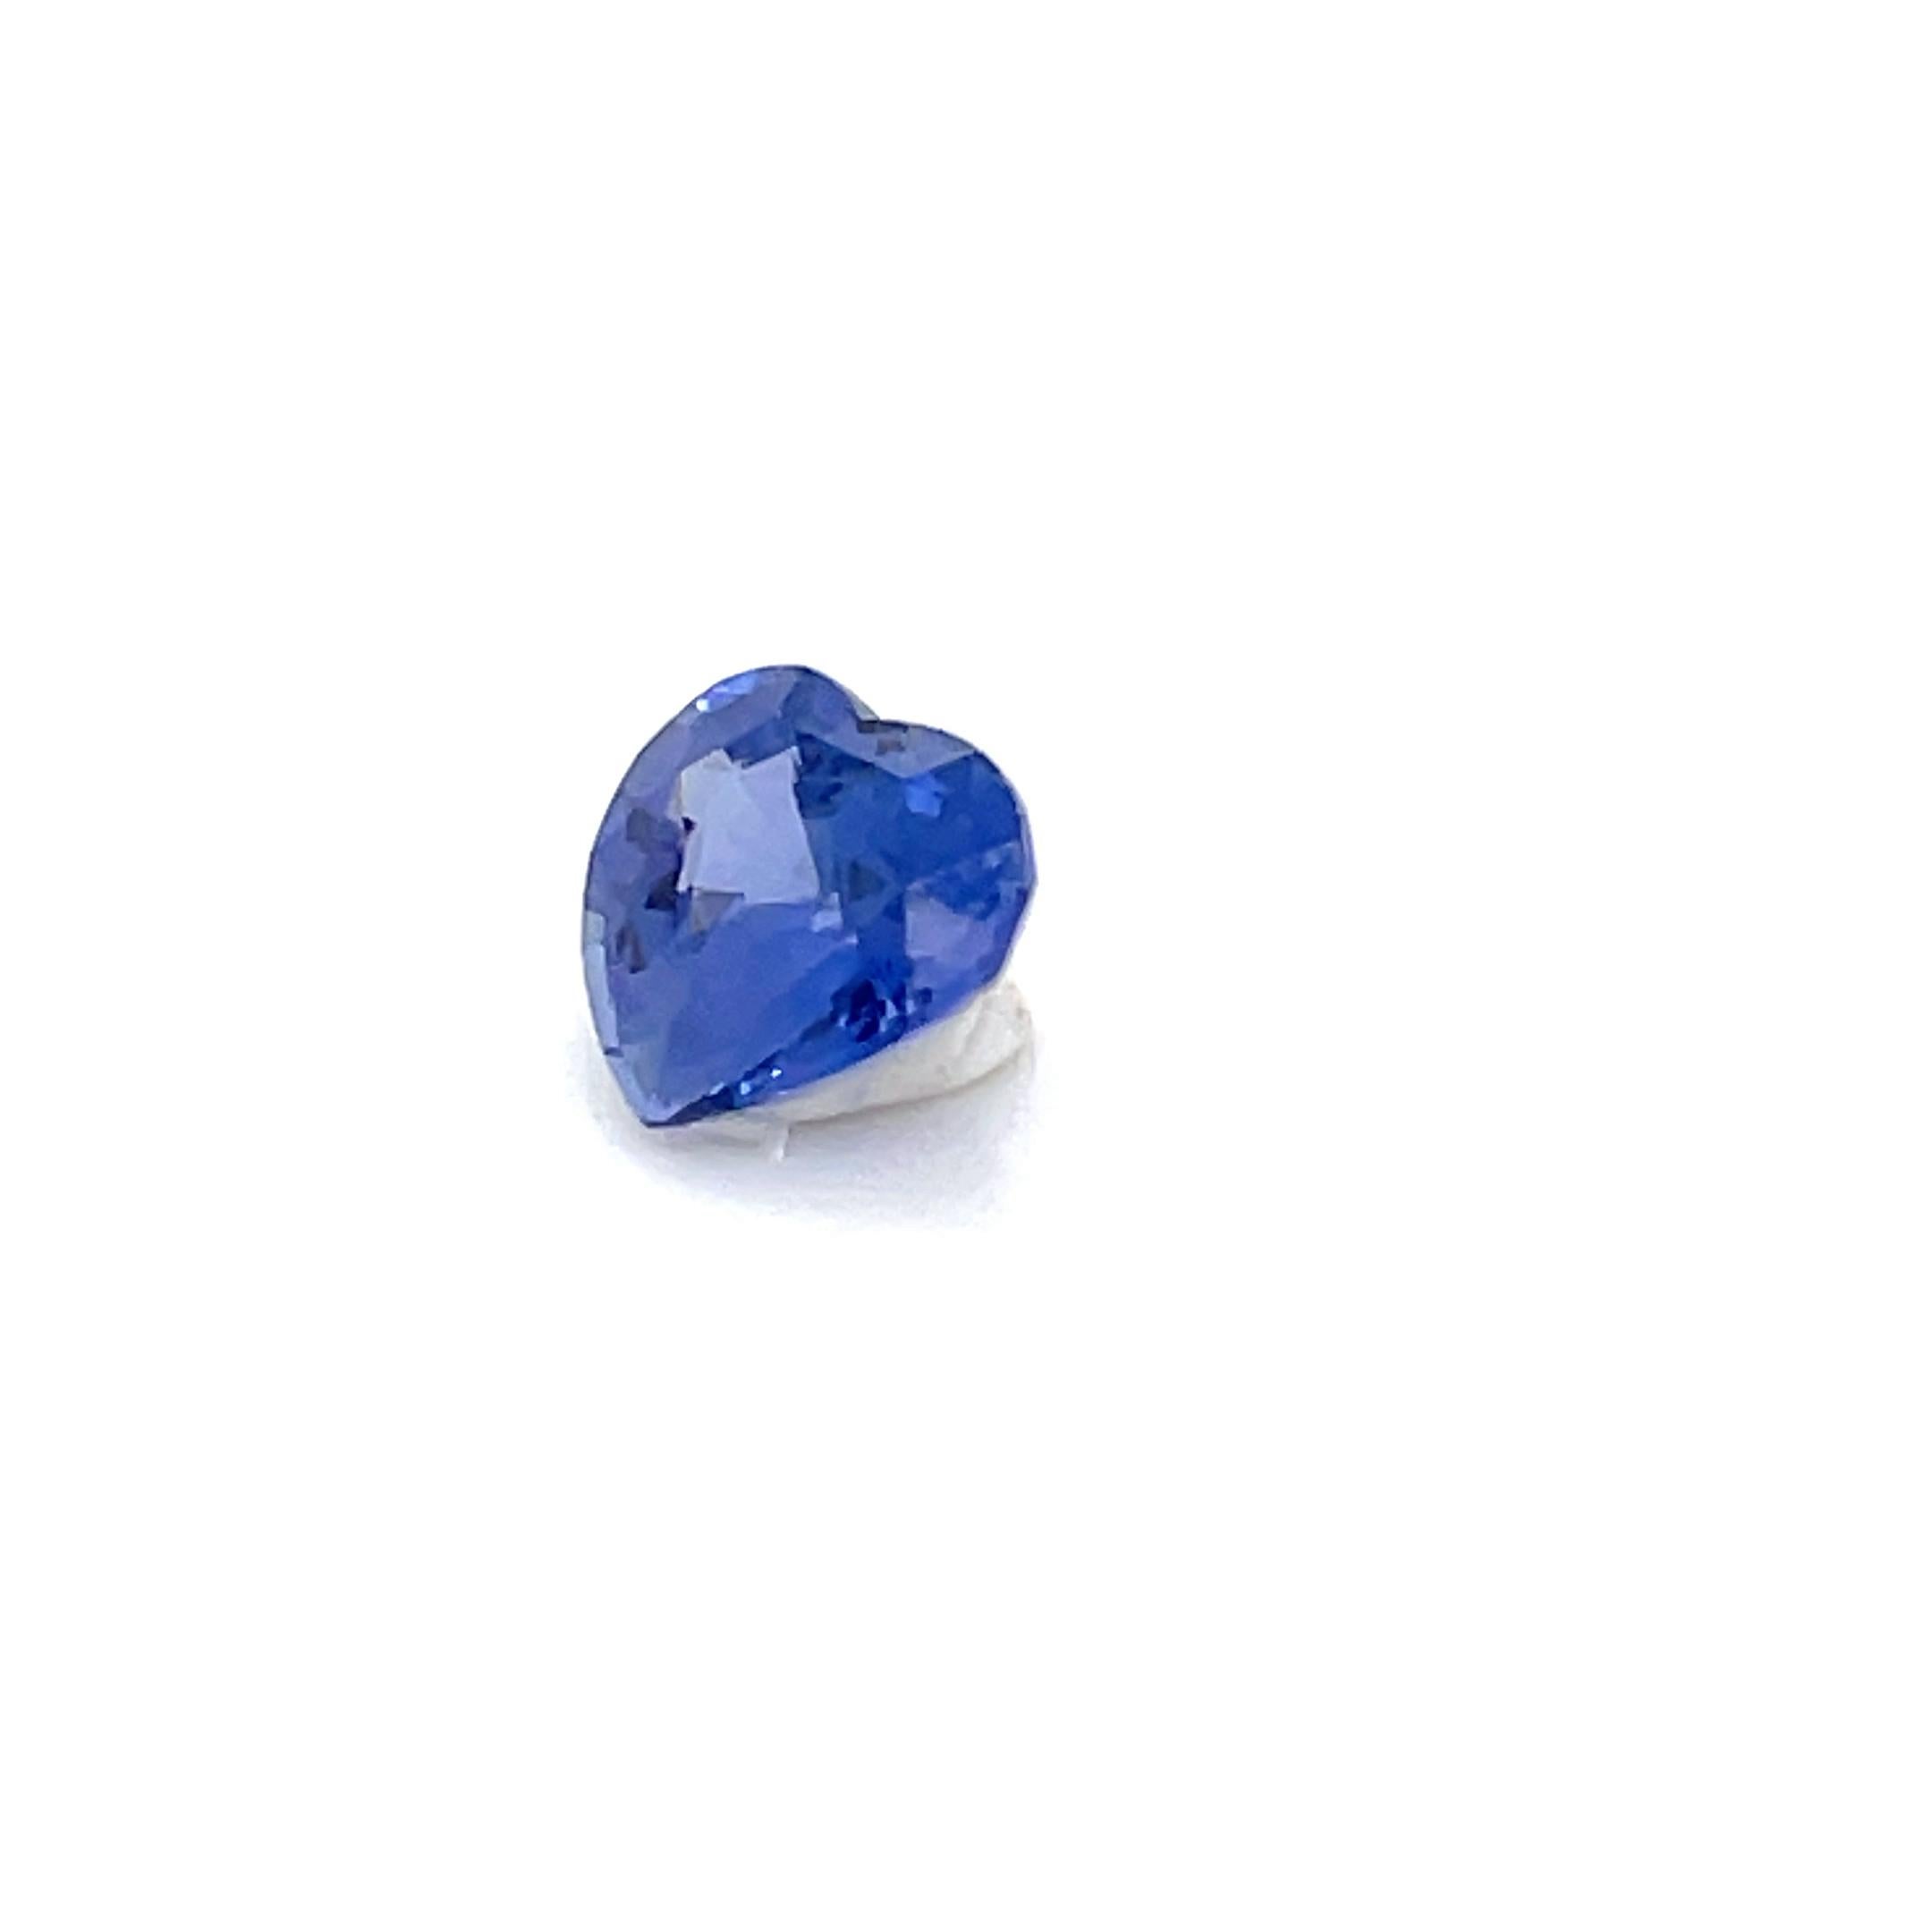 Capture the hearts and eyes with this gemstone.


It weighs 2.11 carats and is expertly shaped into a heart.


This gemstone is a representation of wisdom and intuition that embodies the essence of the deep ocean depths and endless blue skies.

The